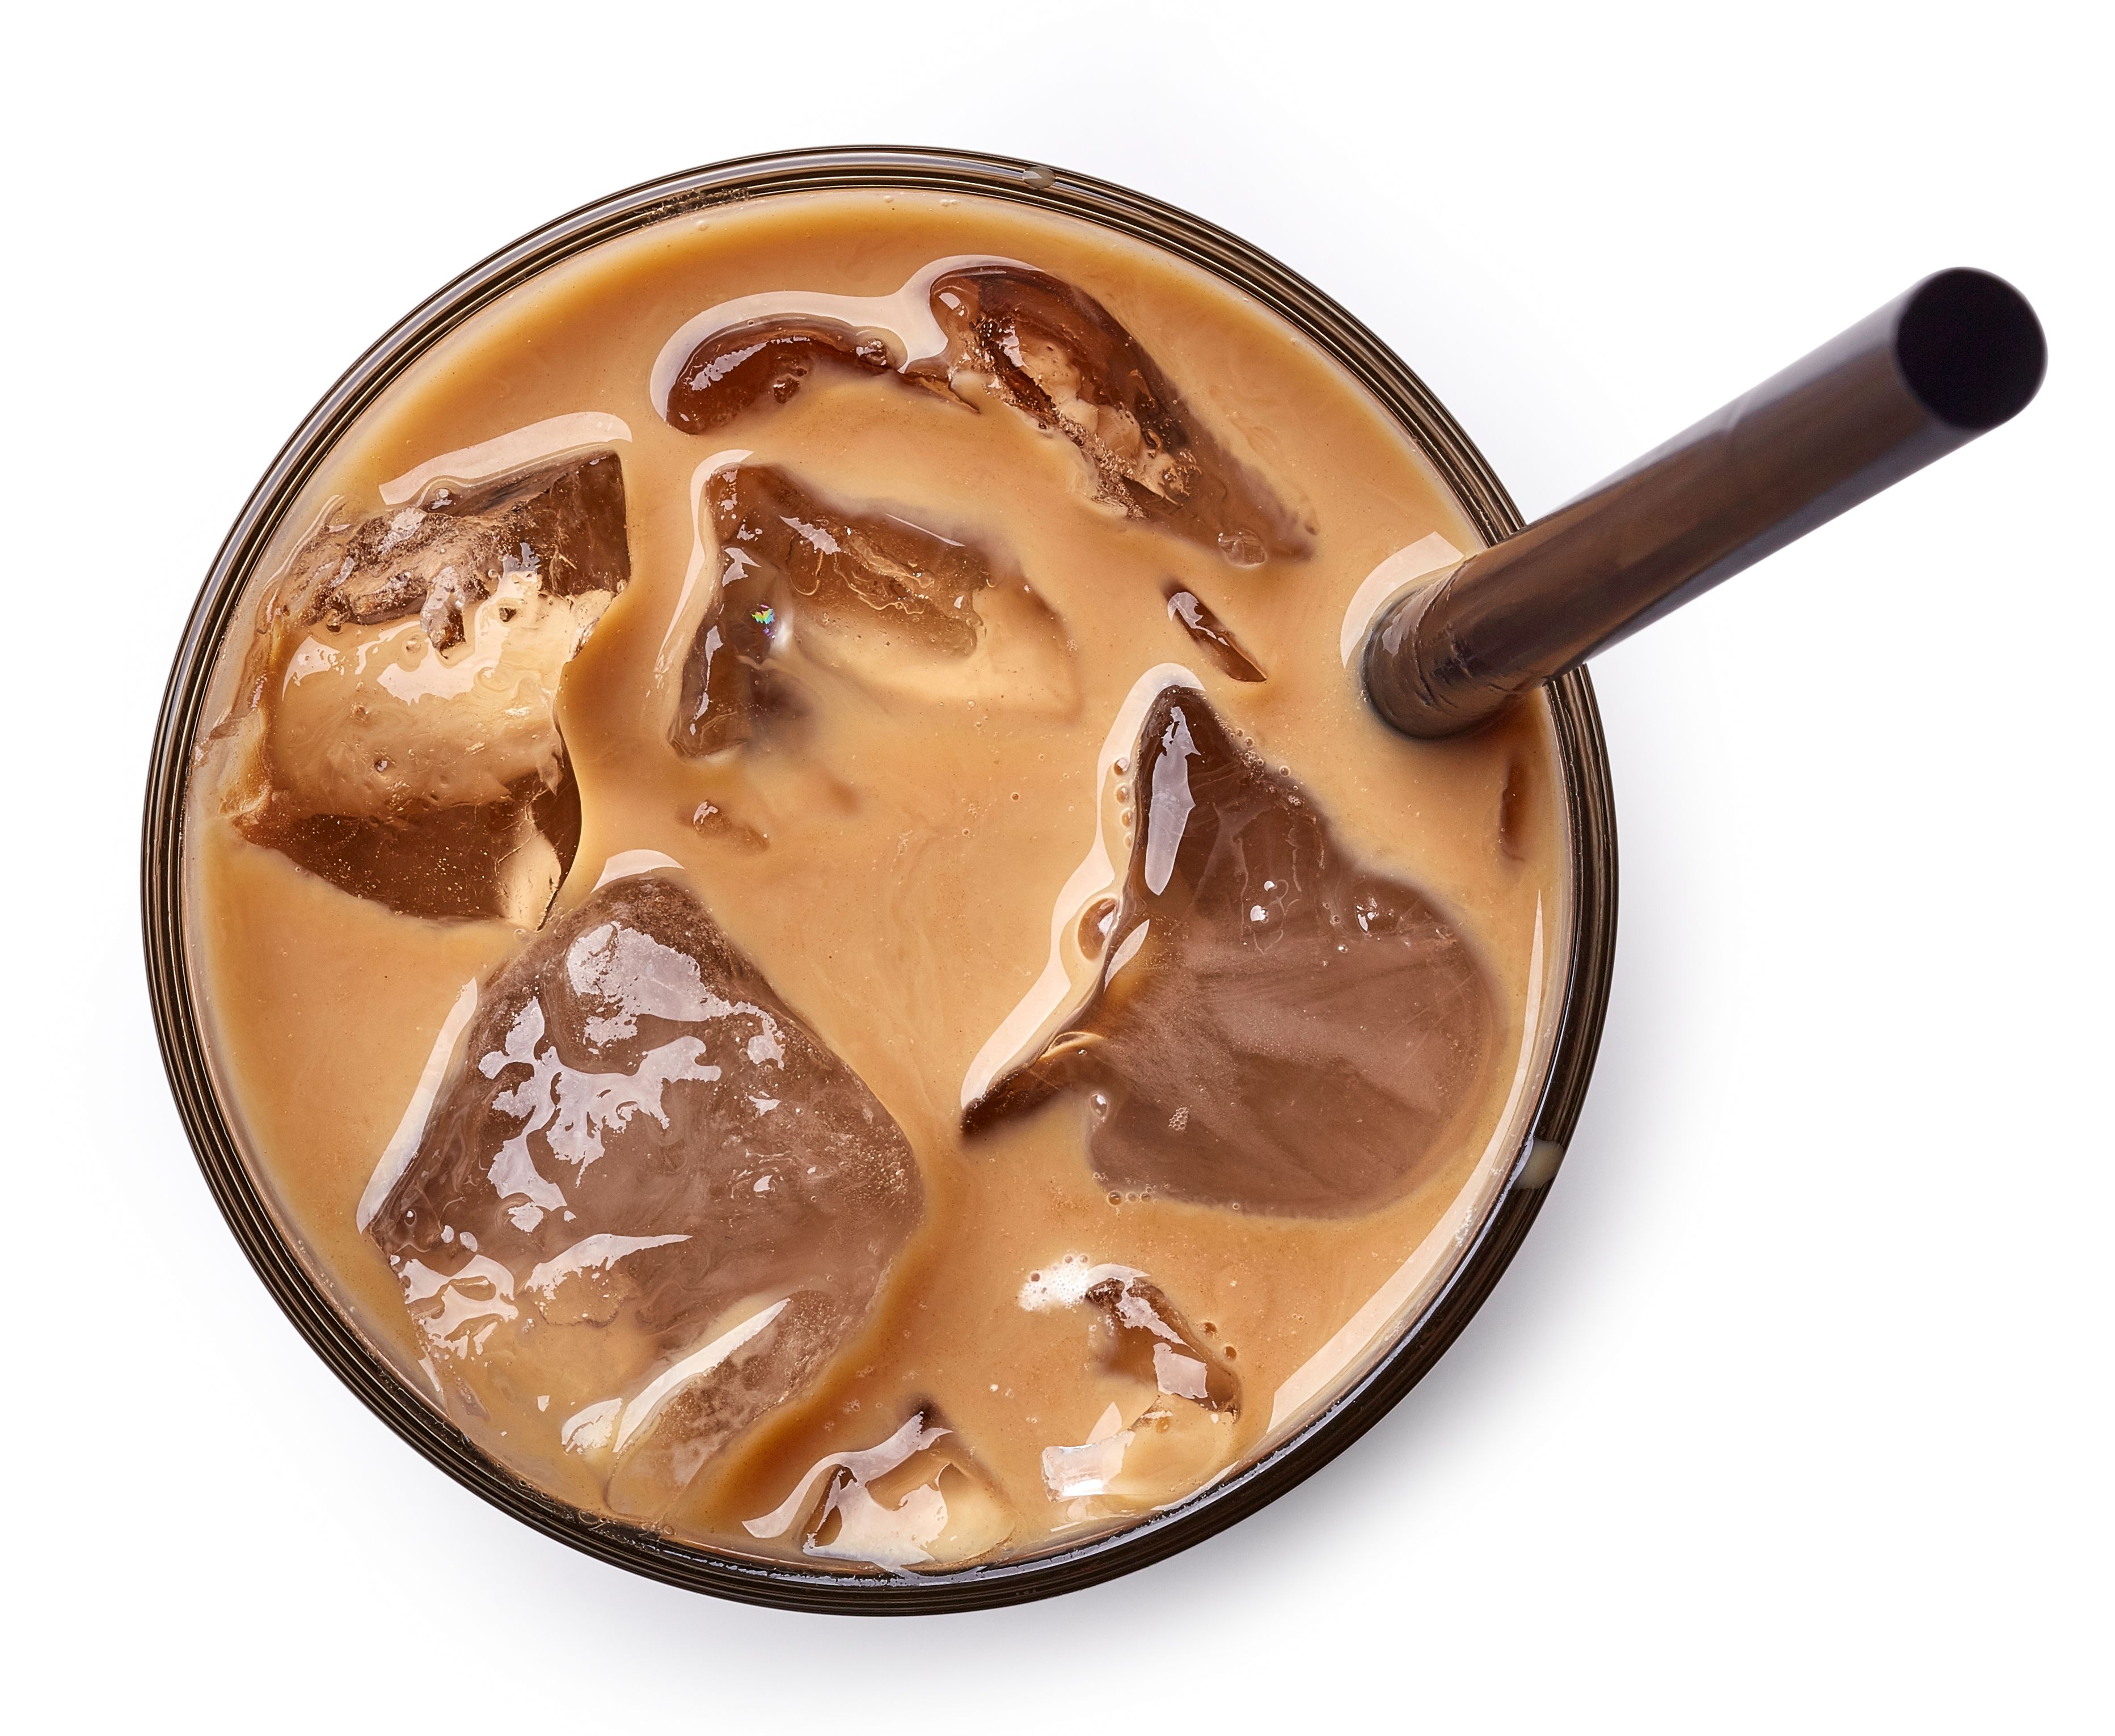 5 Quick and Delicious Iced Coffees